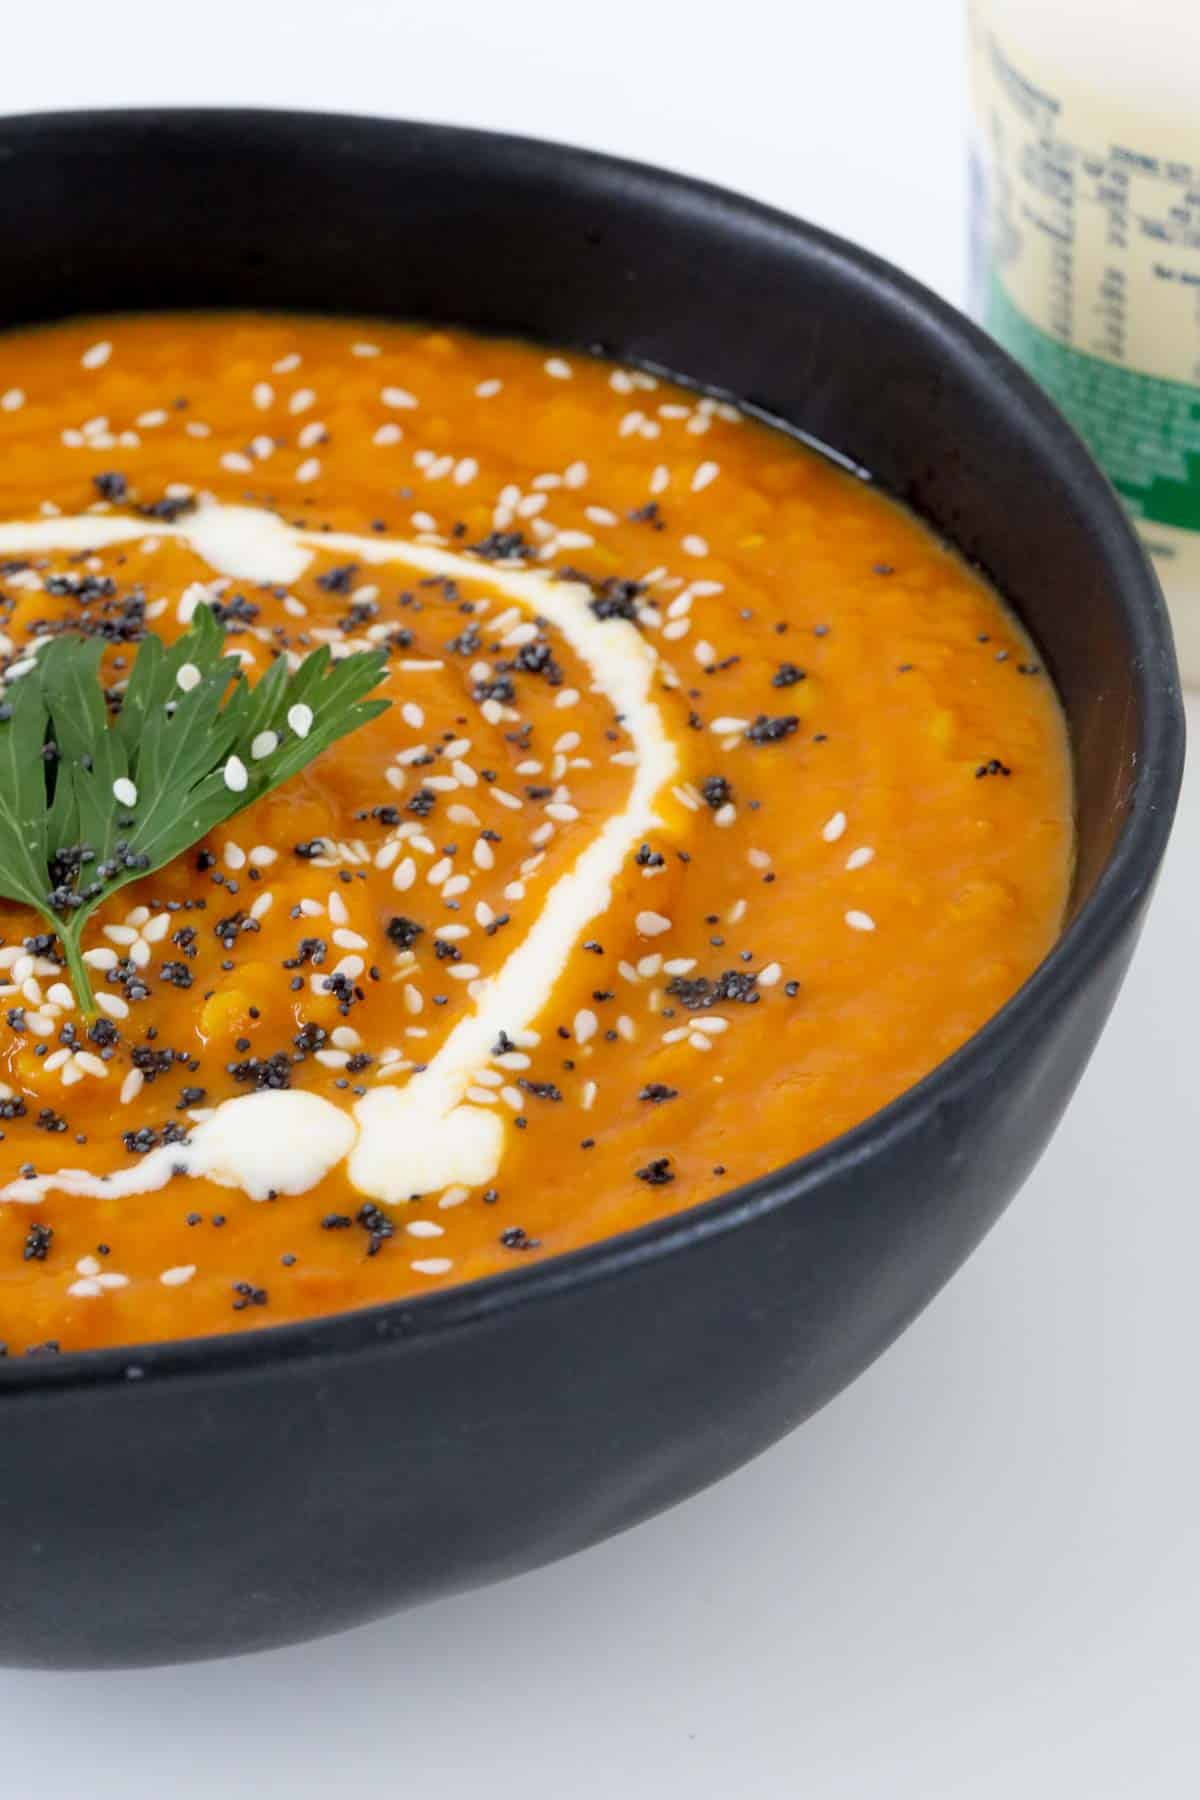 A dollop of cream, sesame seeds and coriander on top of a thick orange soup.